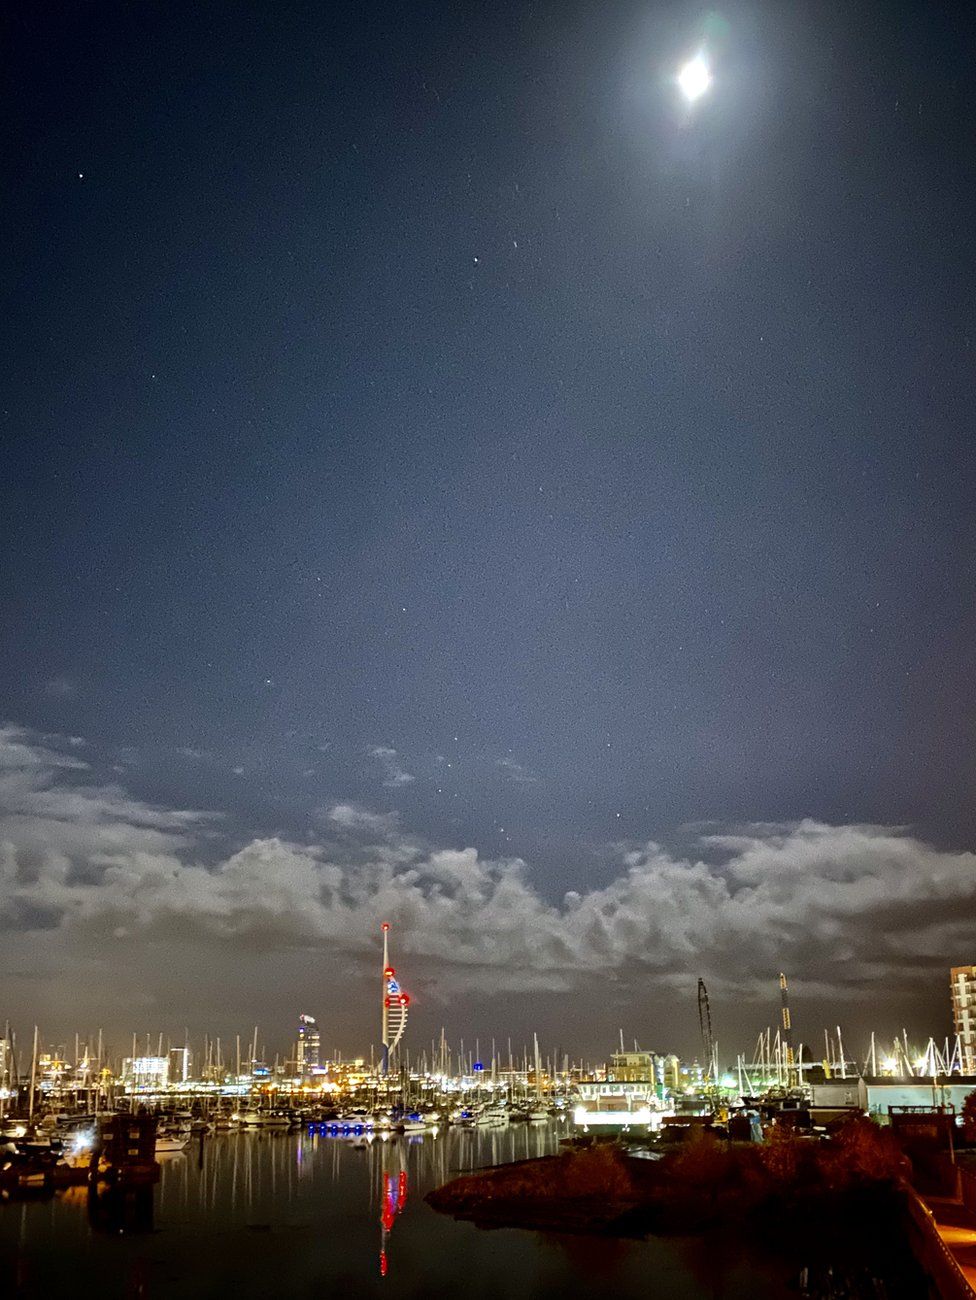 Boats in a harbour under moonlight